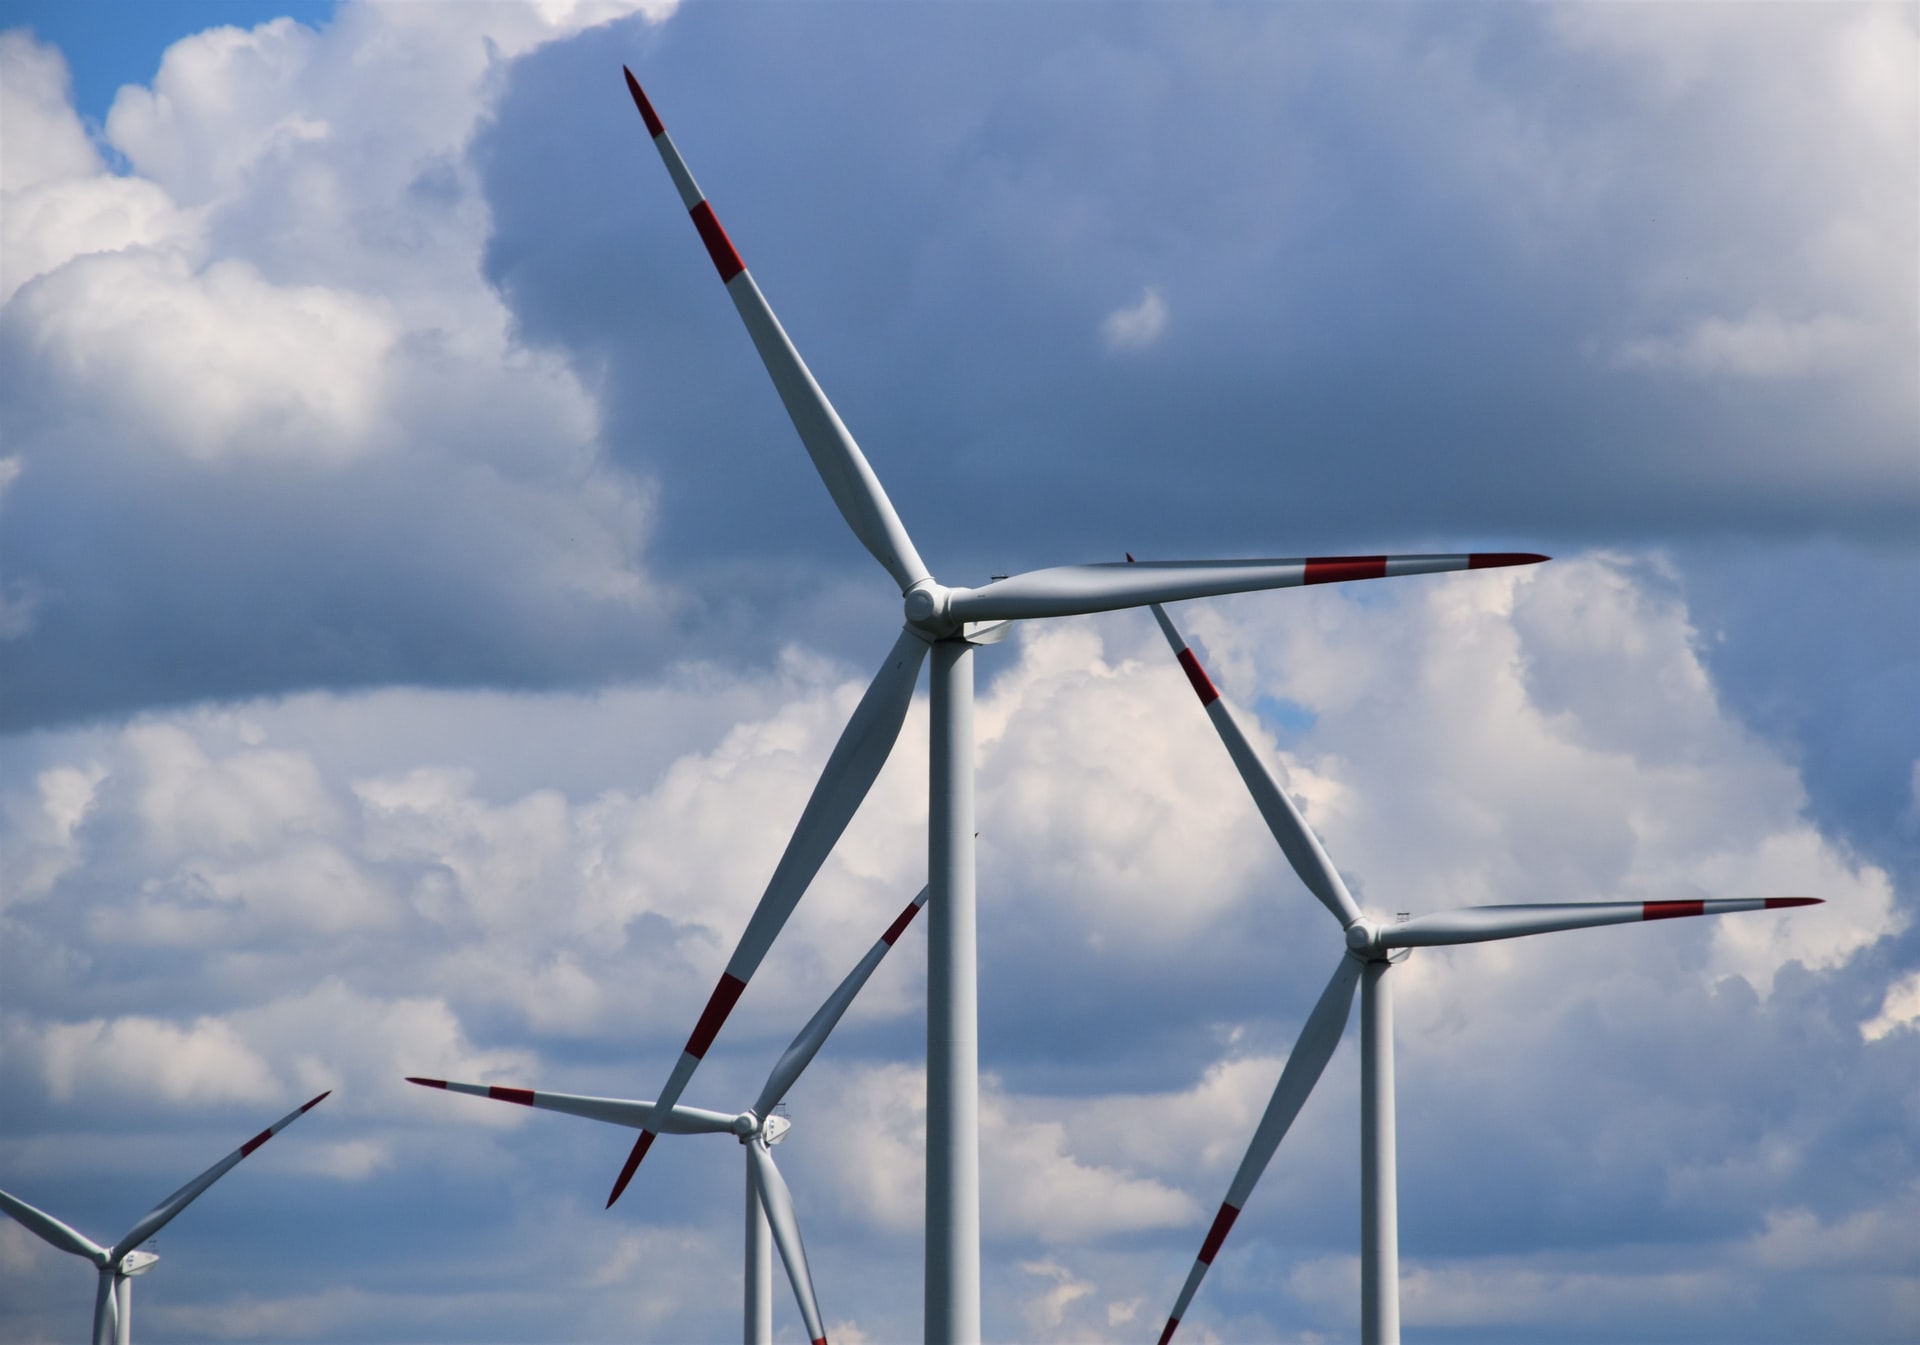 Maryland’s offshore wind economy will be forged in steel￼